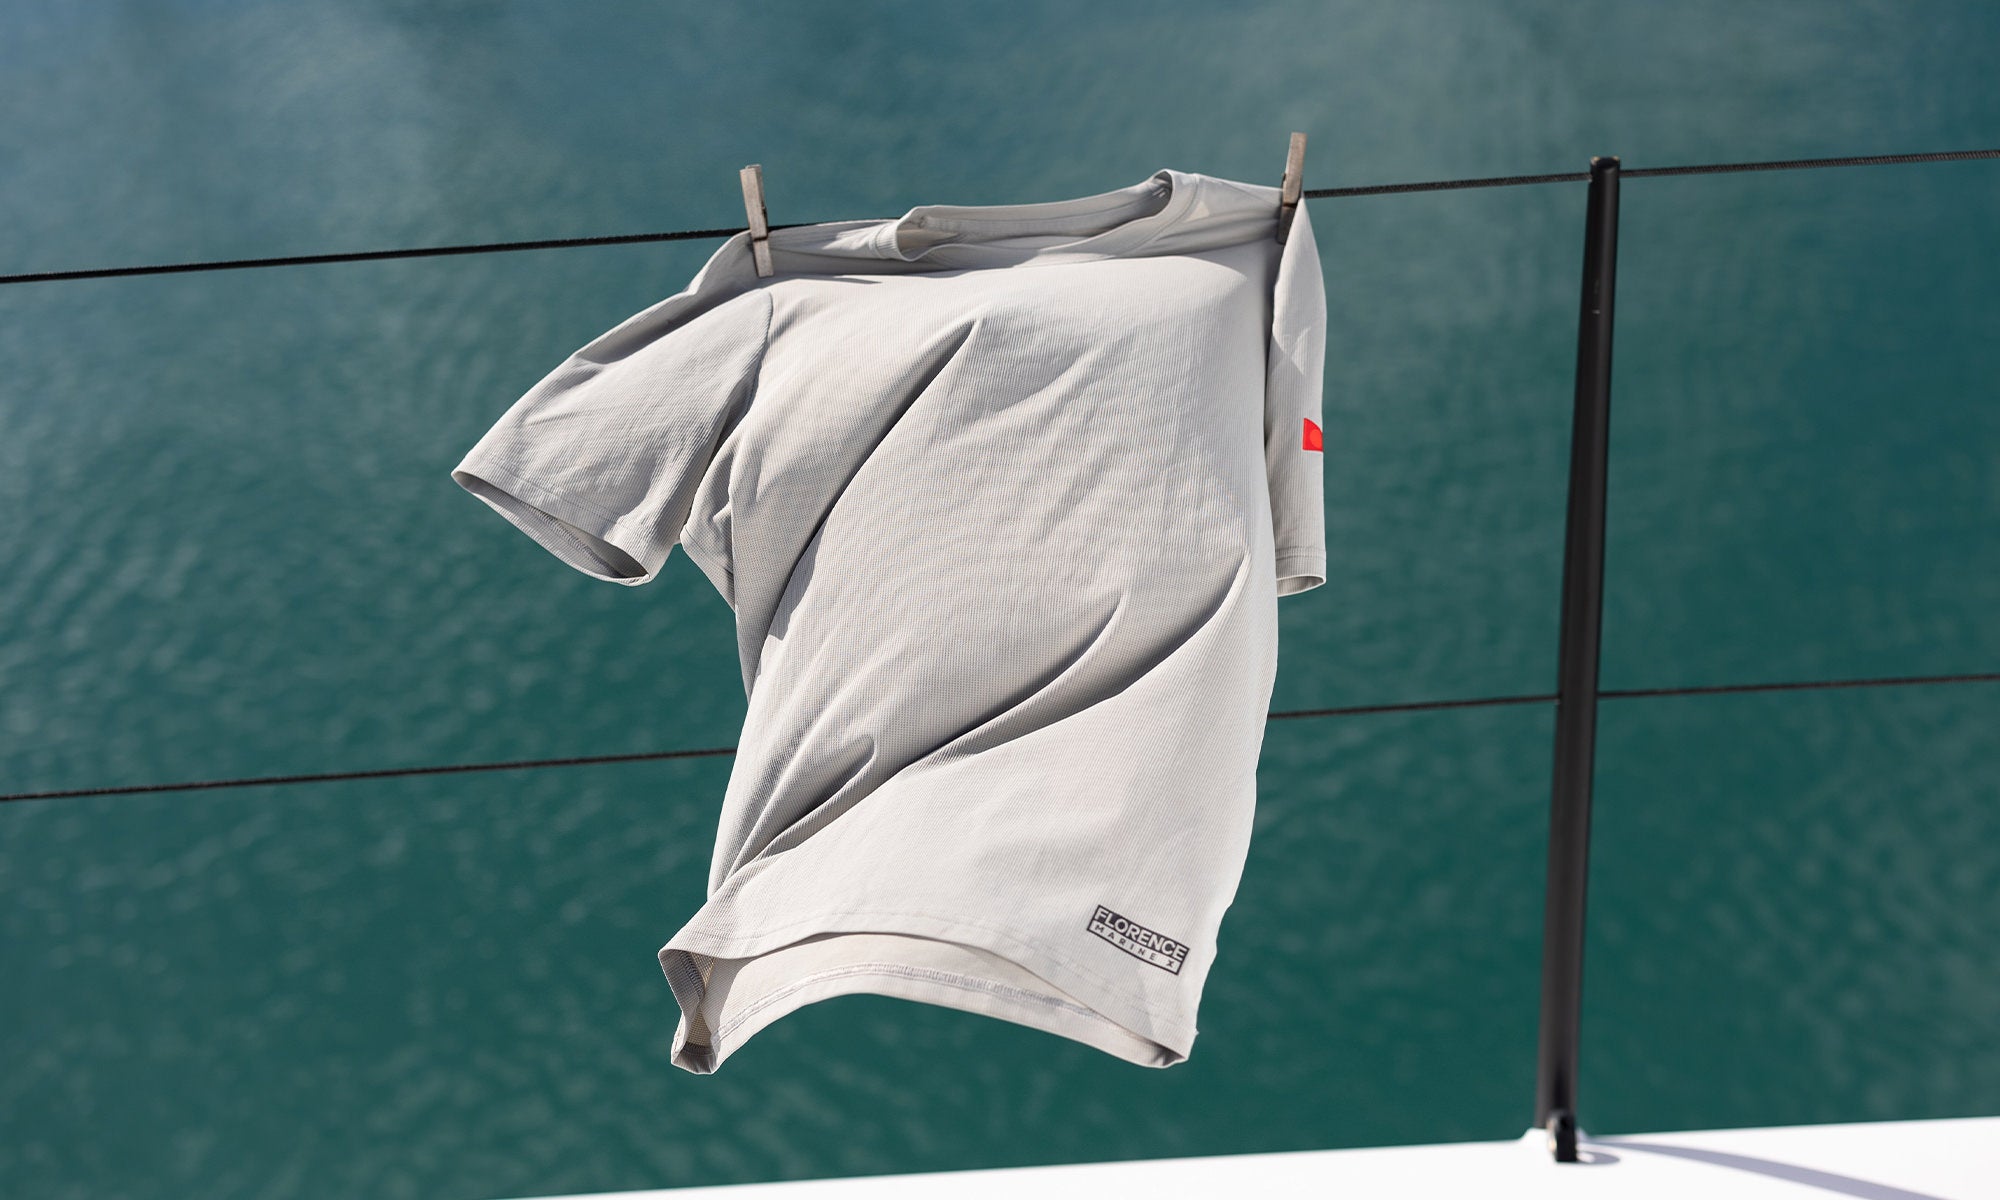 Airtex Shirt blowing in the wind on a sailboat